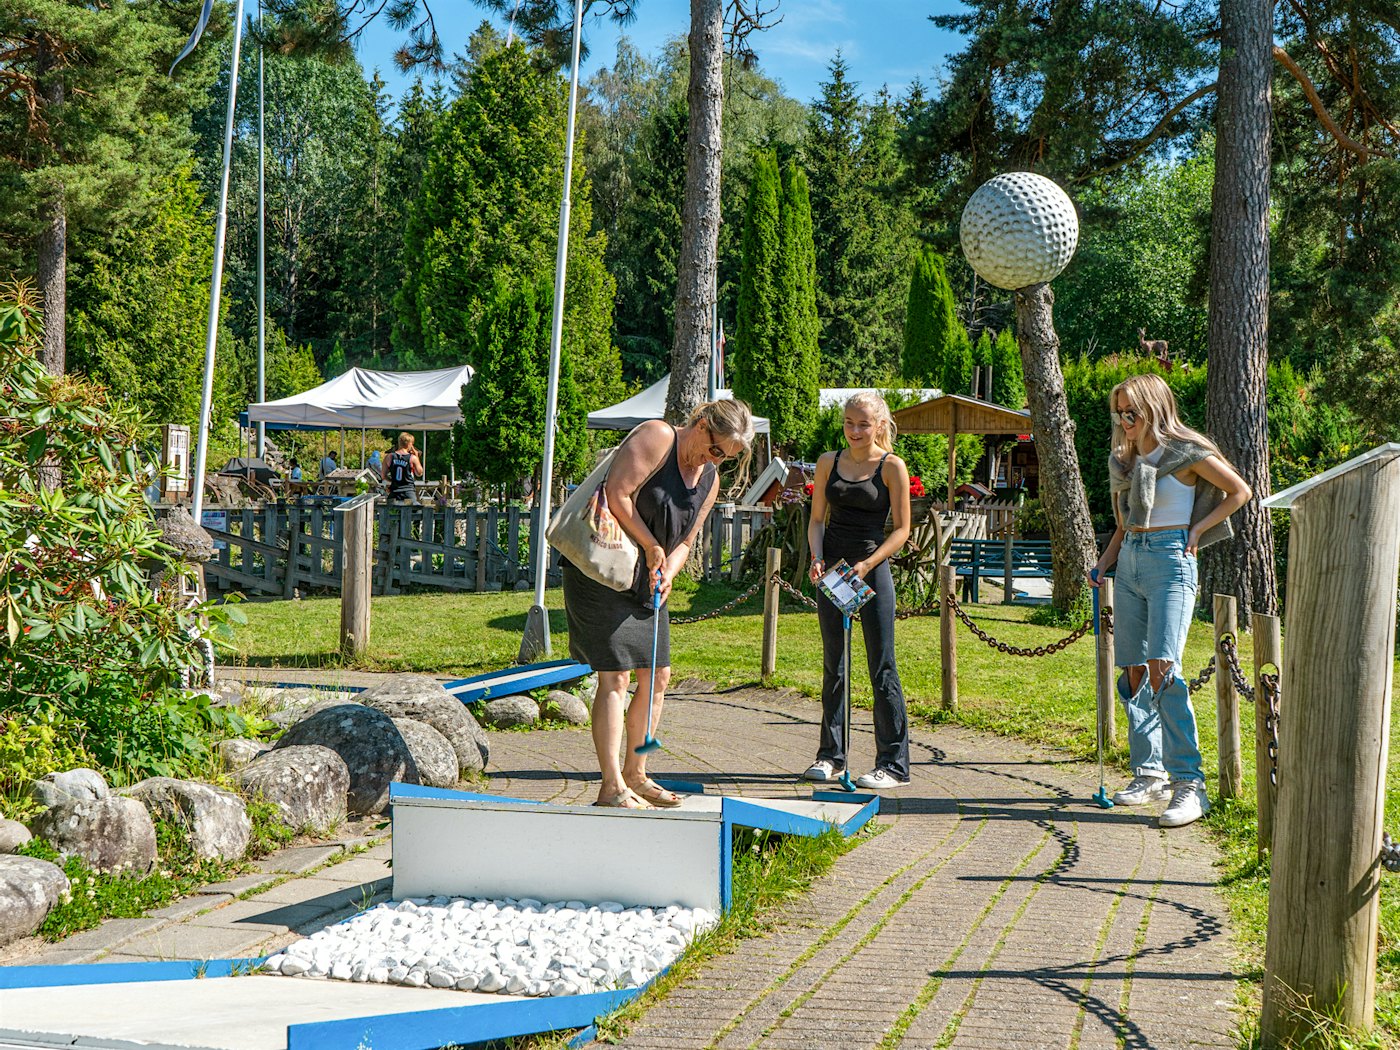 A mother and two teenage daughters smile and play miniature golf. Photo